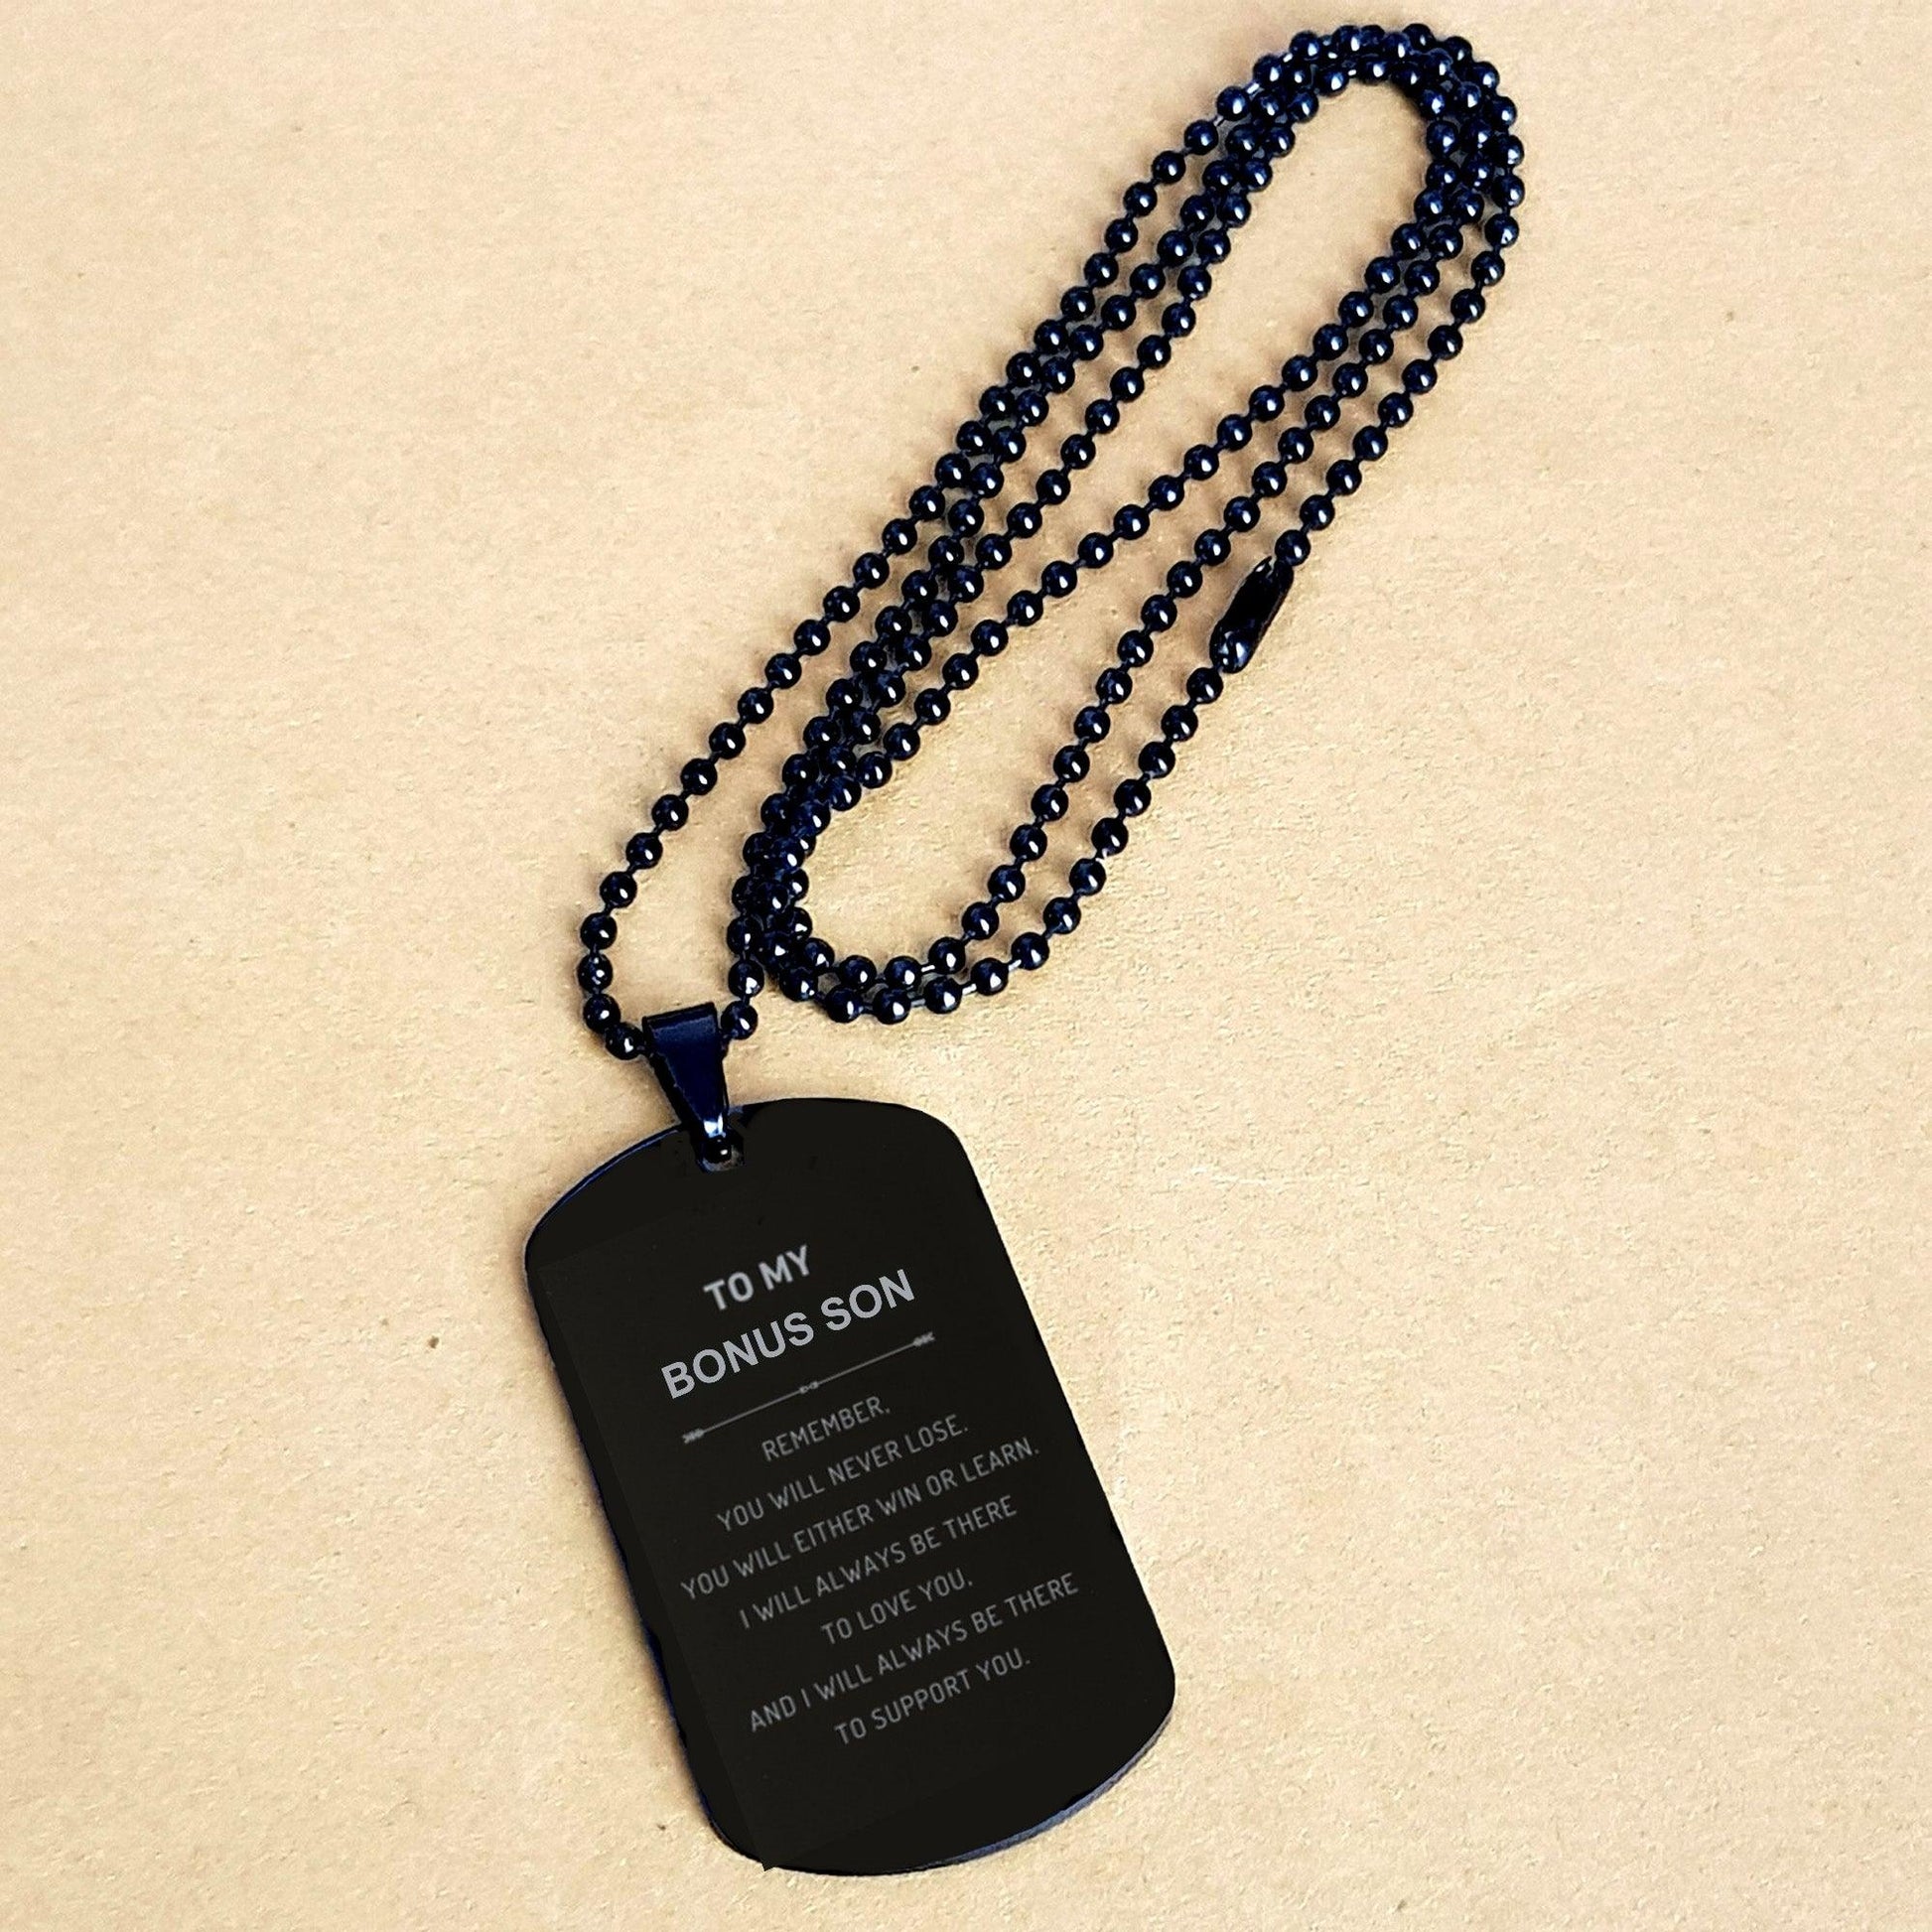 Bonus Son Gifts, To My Bonus Son Remember, you will never lose. You will either WIN or LEARN, Keepsake Black Dog Tag For Bonus Son Engraved, Birthday Christmas Gifts Ideas For Bonus Son X-mas Gifts - Mallard Moon Gift Shop